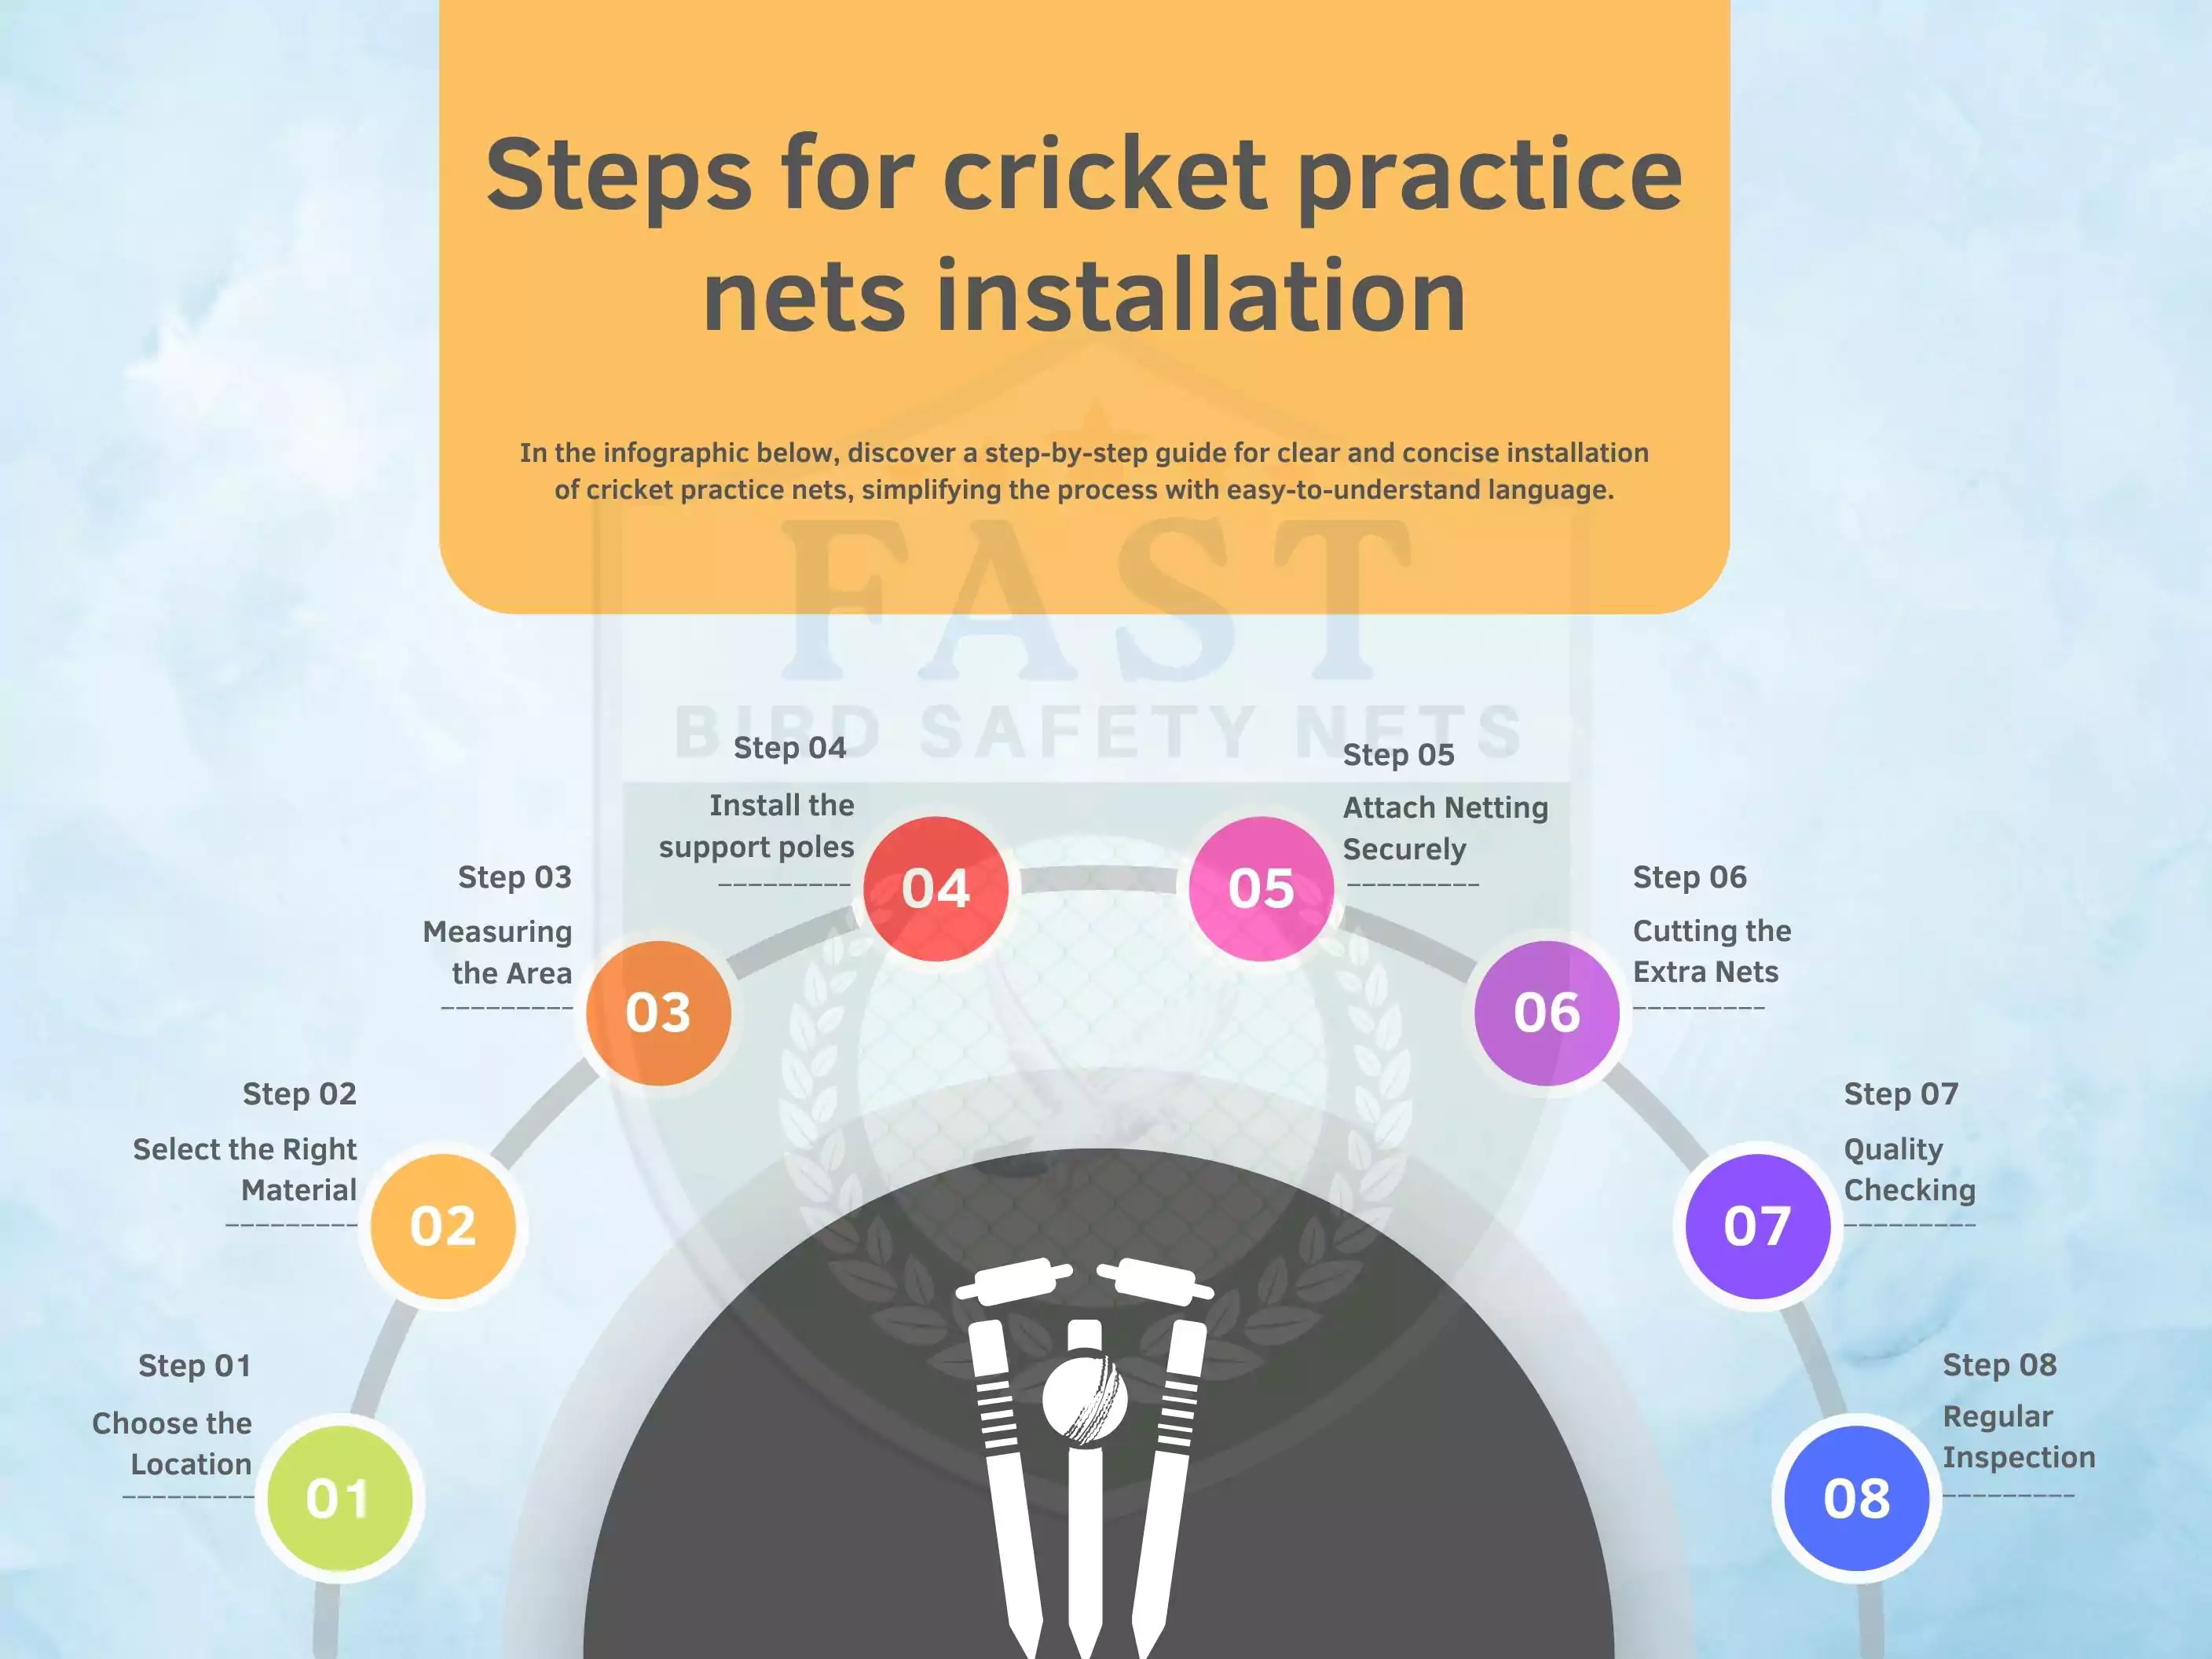 8 Steps for Cricket Practice Nets Installation